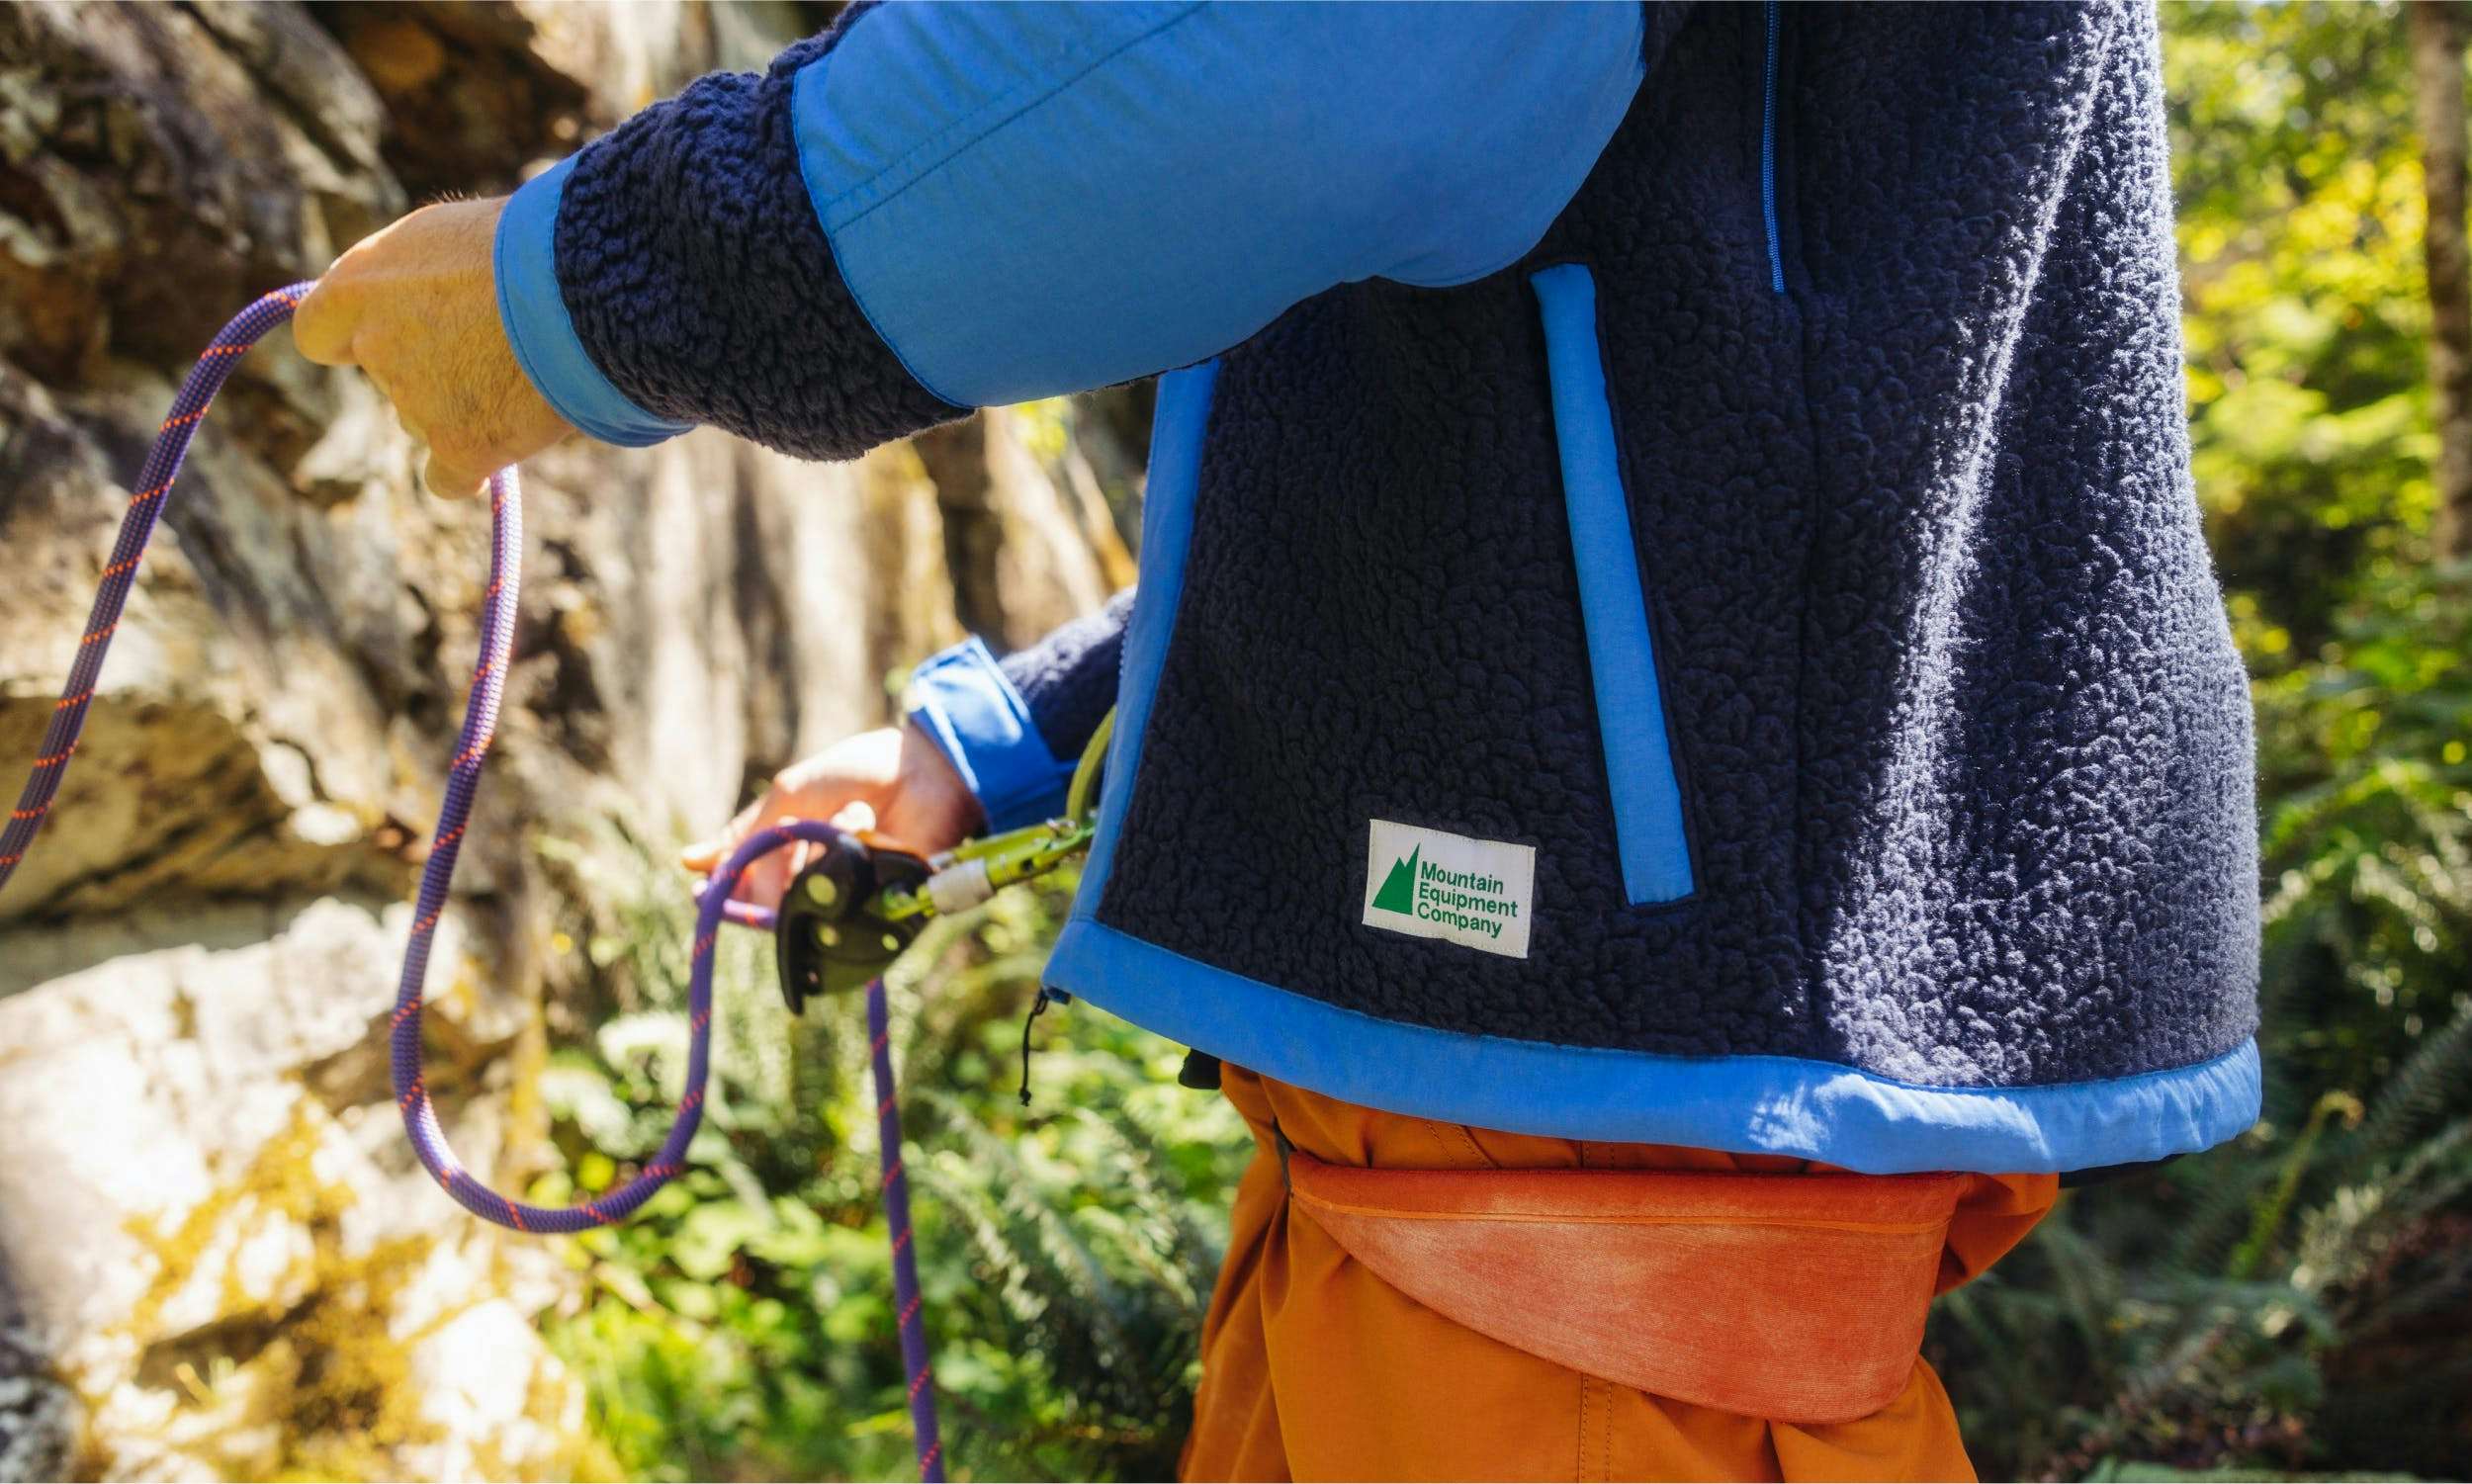 A closeup shot of a blue, fuzzy fleece with the MEC logo on the label in green. The person wearing the fleece is belaying.